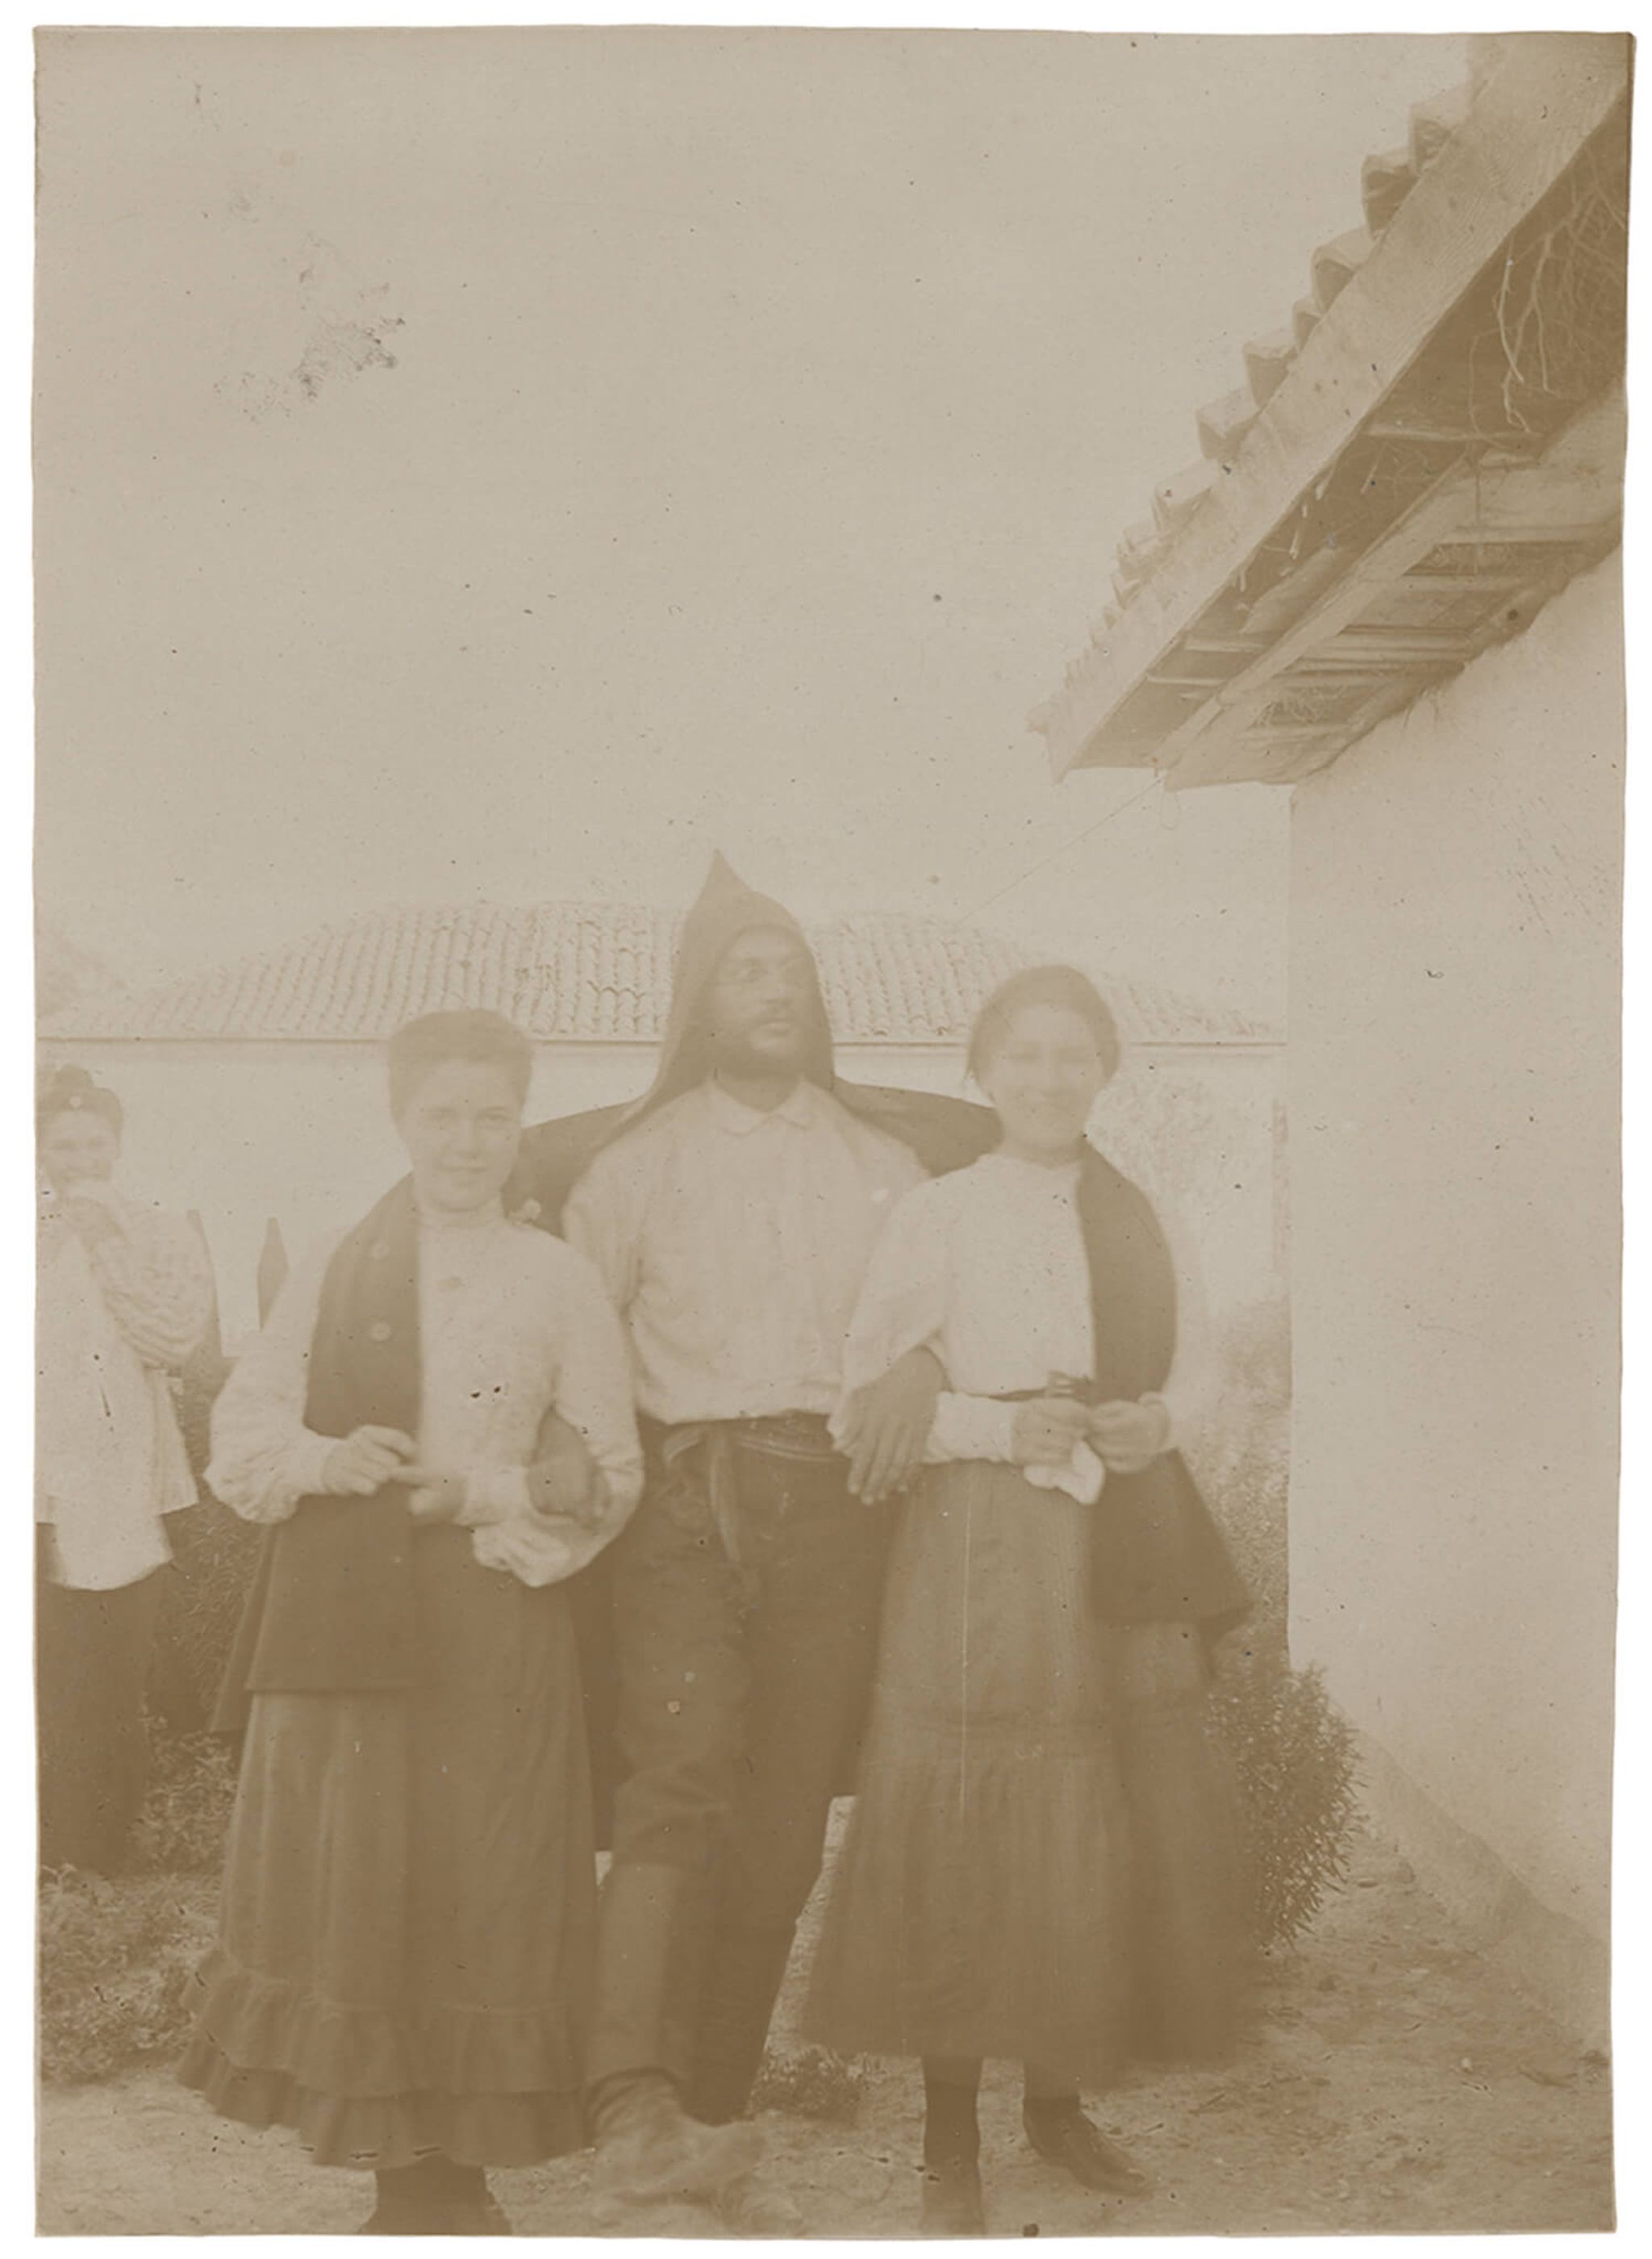 Image for: E. Morawski with Two Young Women